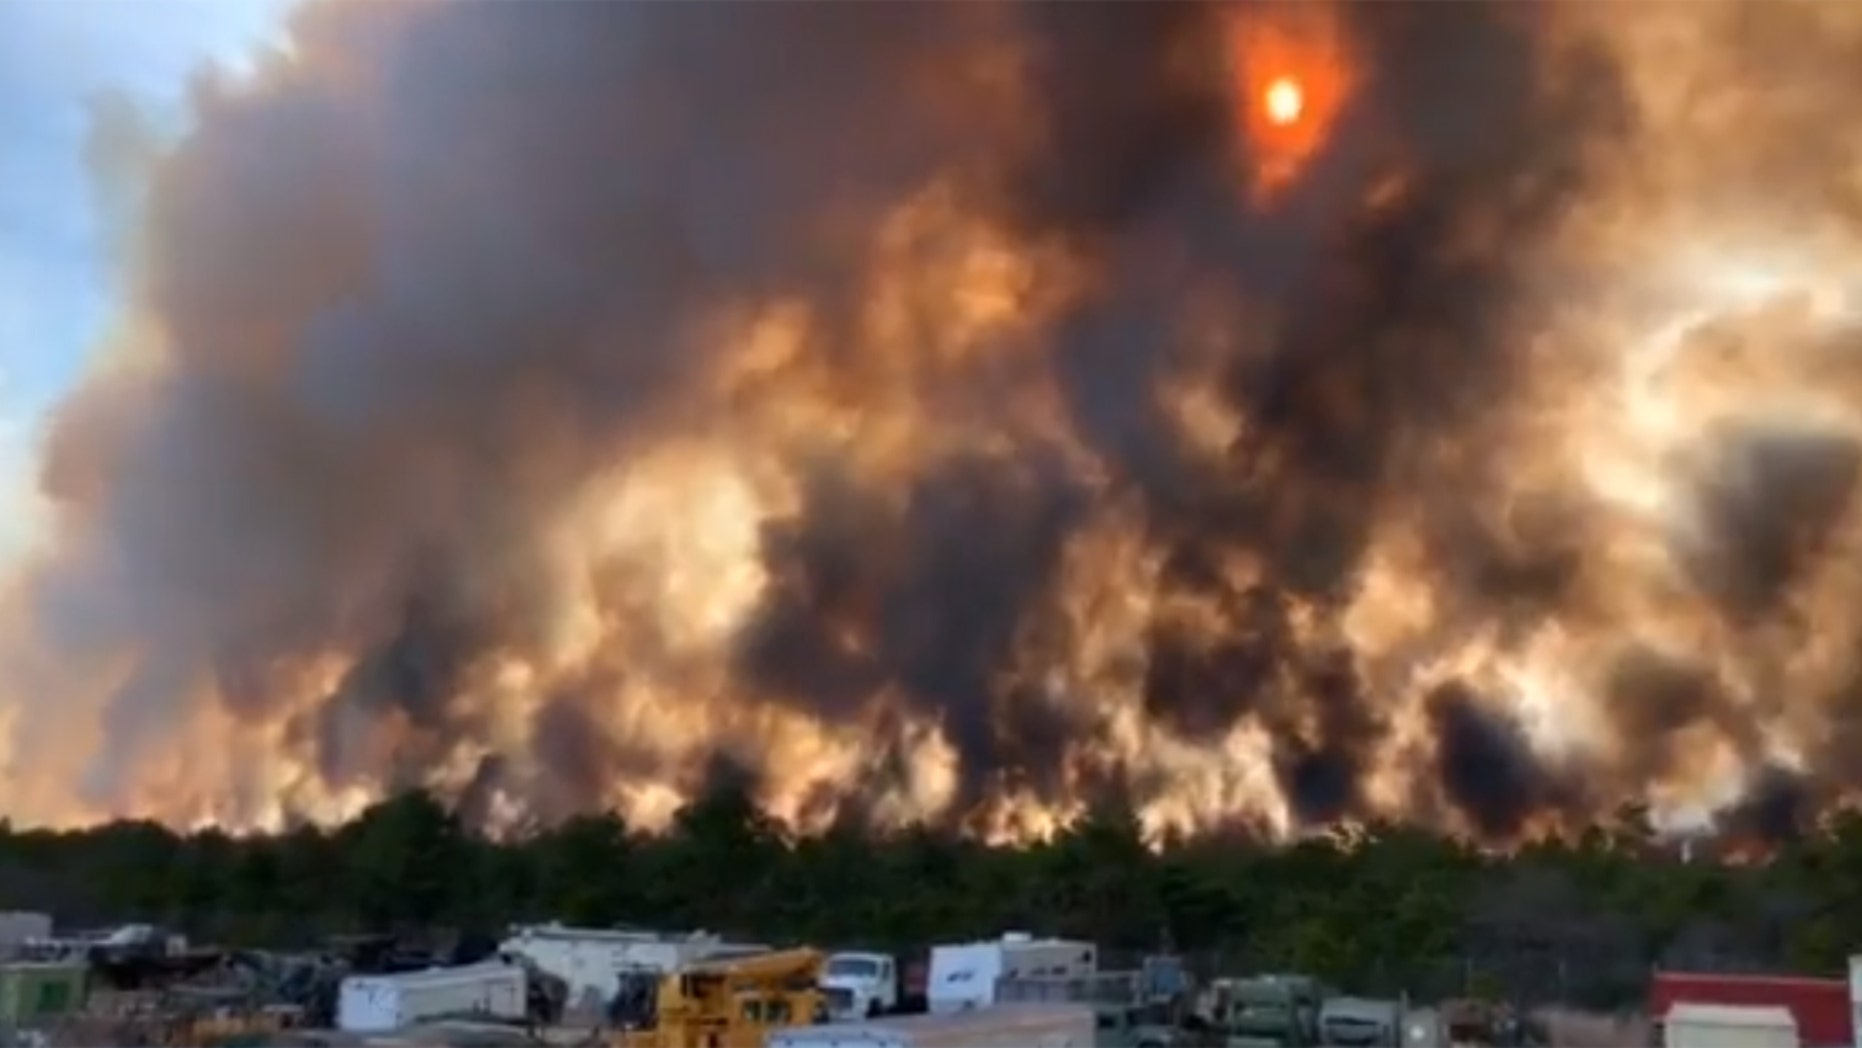 A fire burning in the Penn State Forest in Burlington County, New Jersey, sent smoke into the north of the country, prompting New Yorkers to report the smell of smoke.